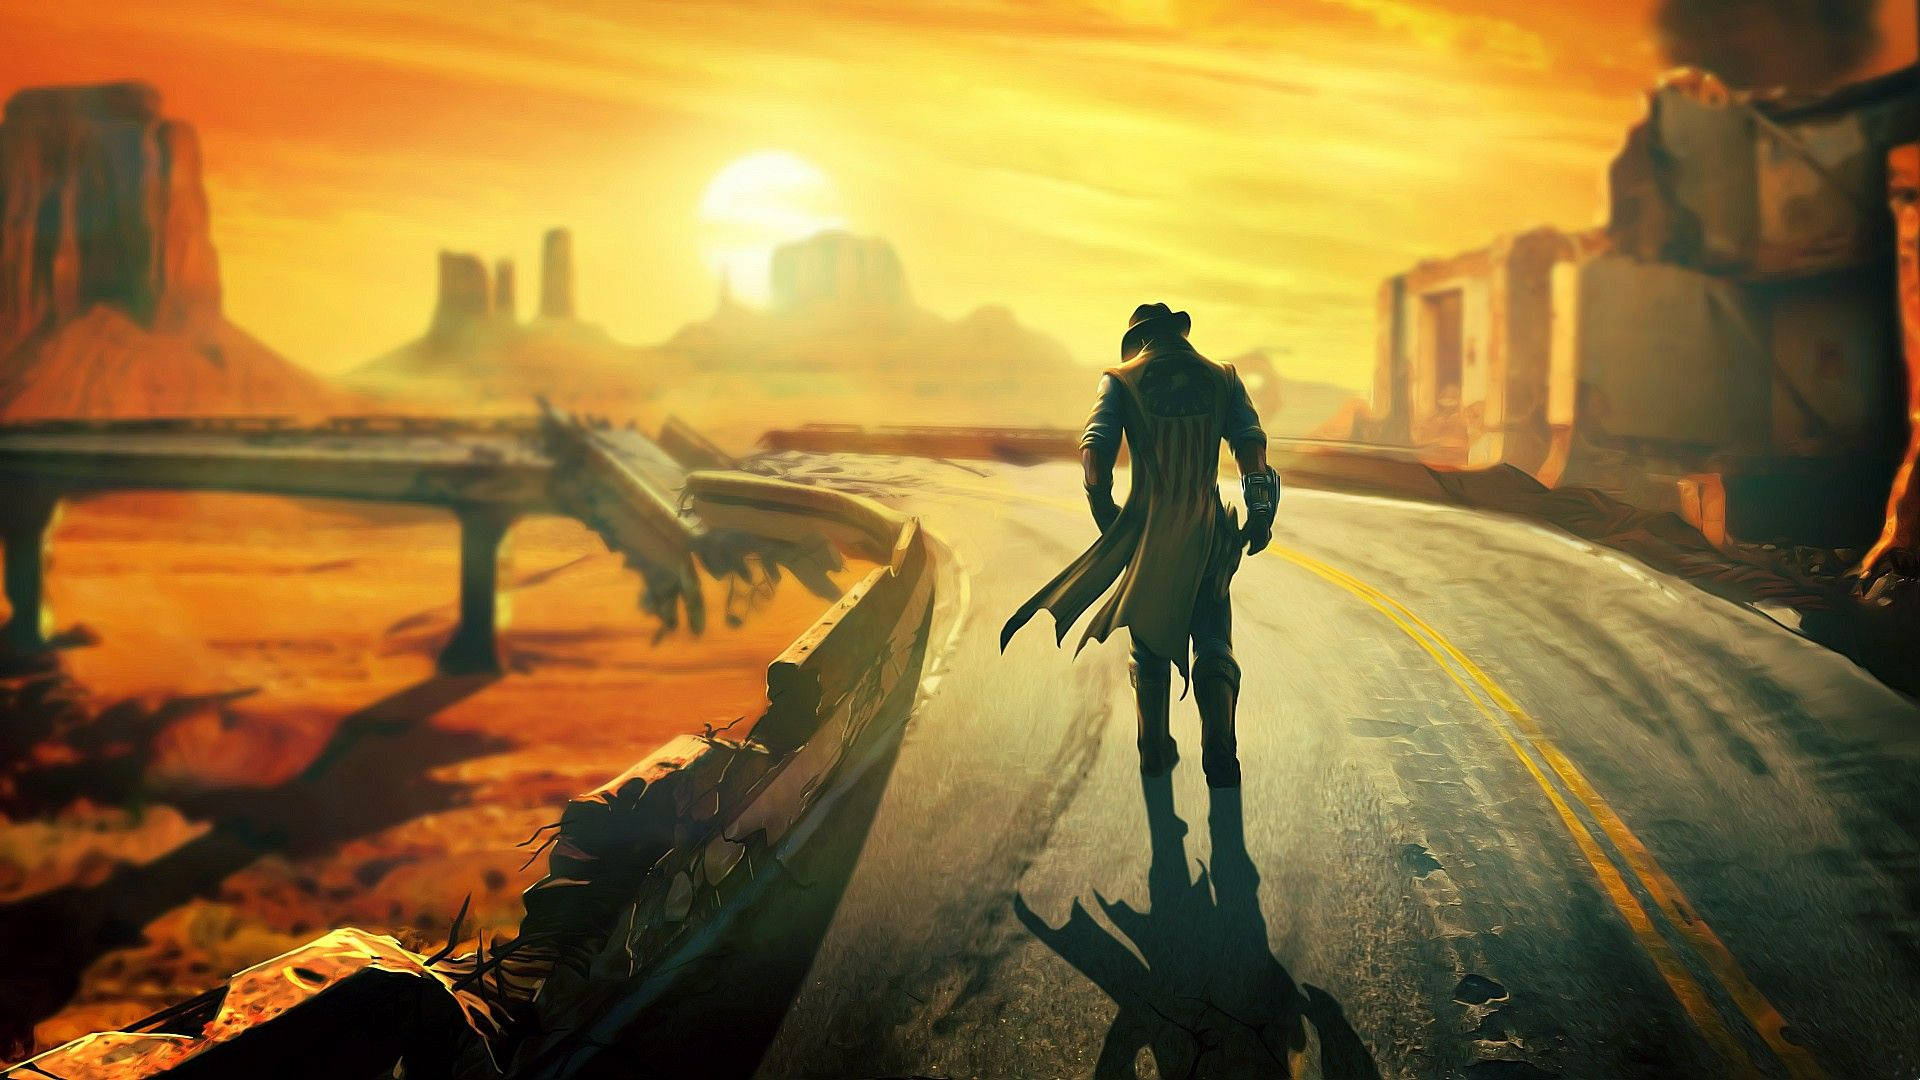 Is hope found at the end of the Lonesome Road? Wallpaper